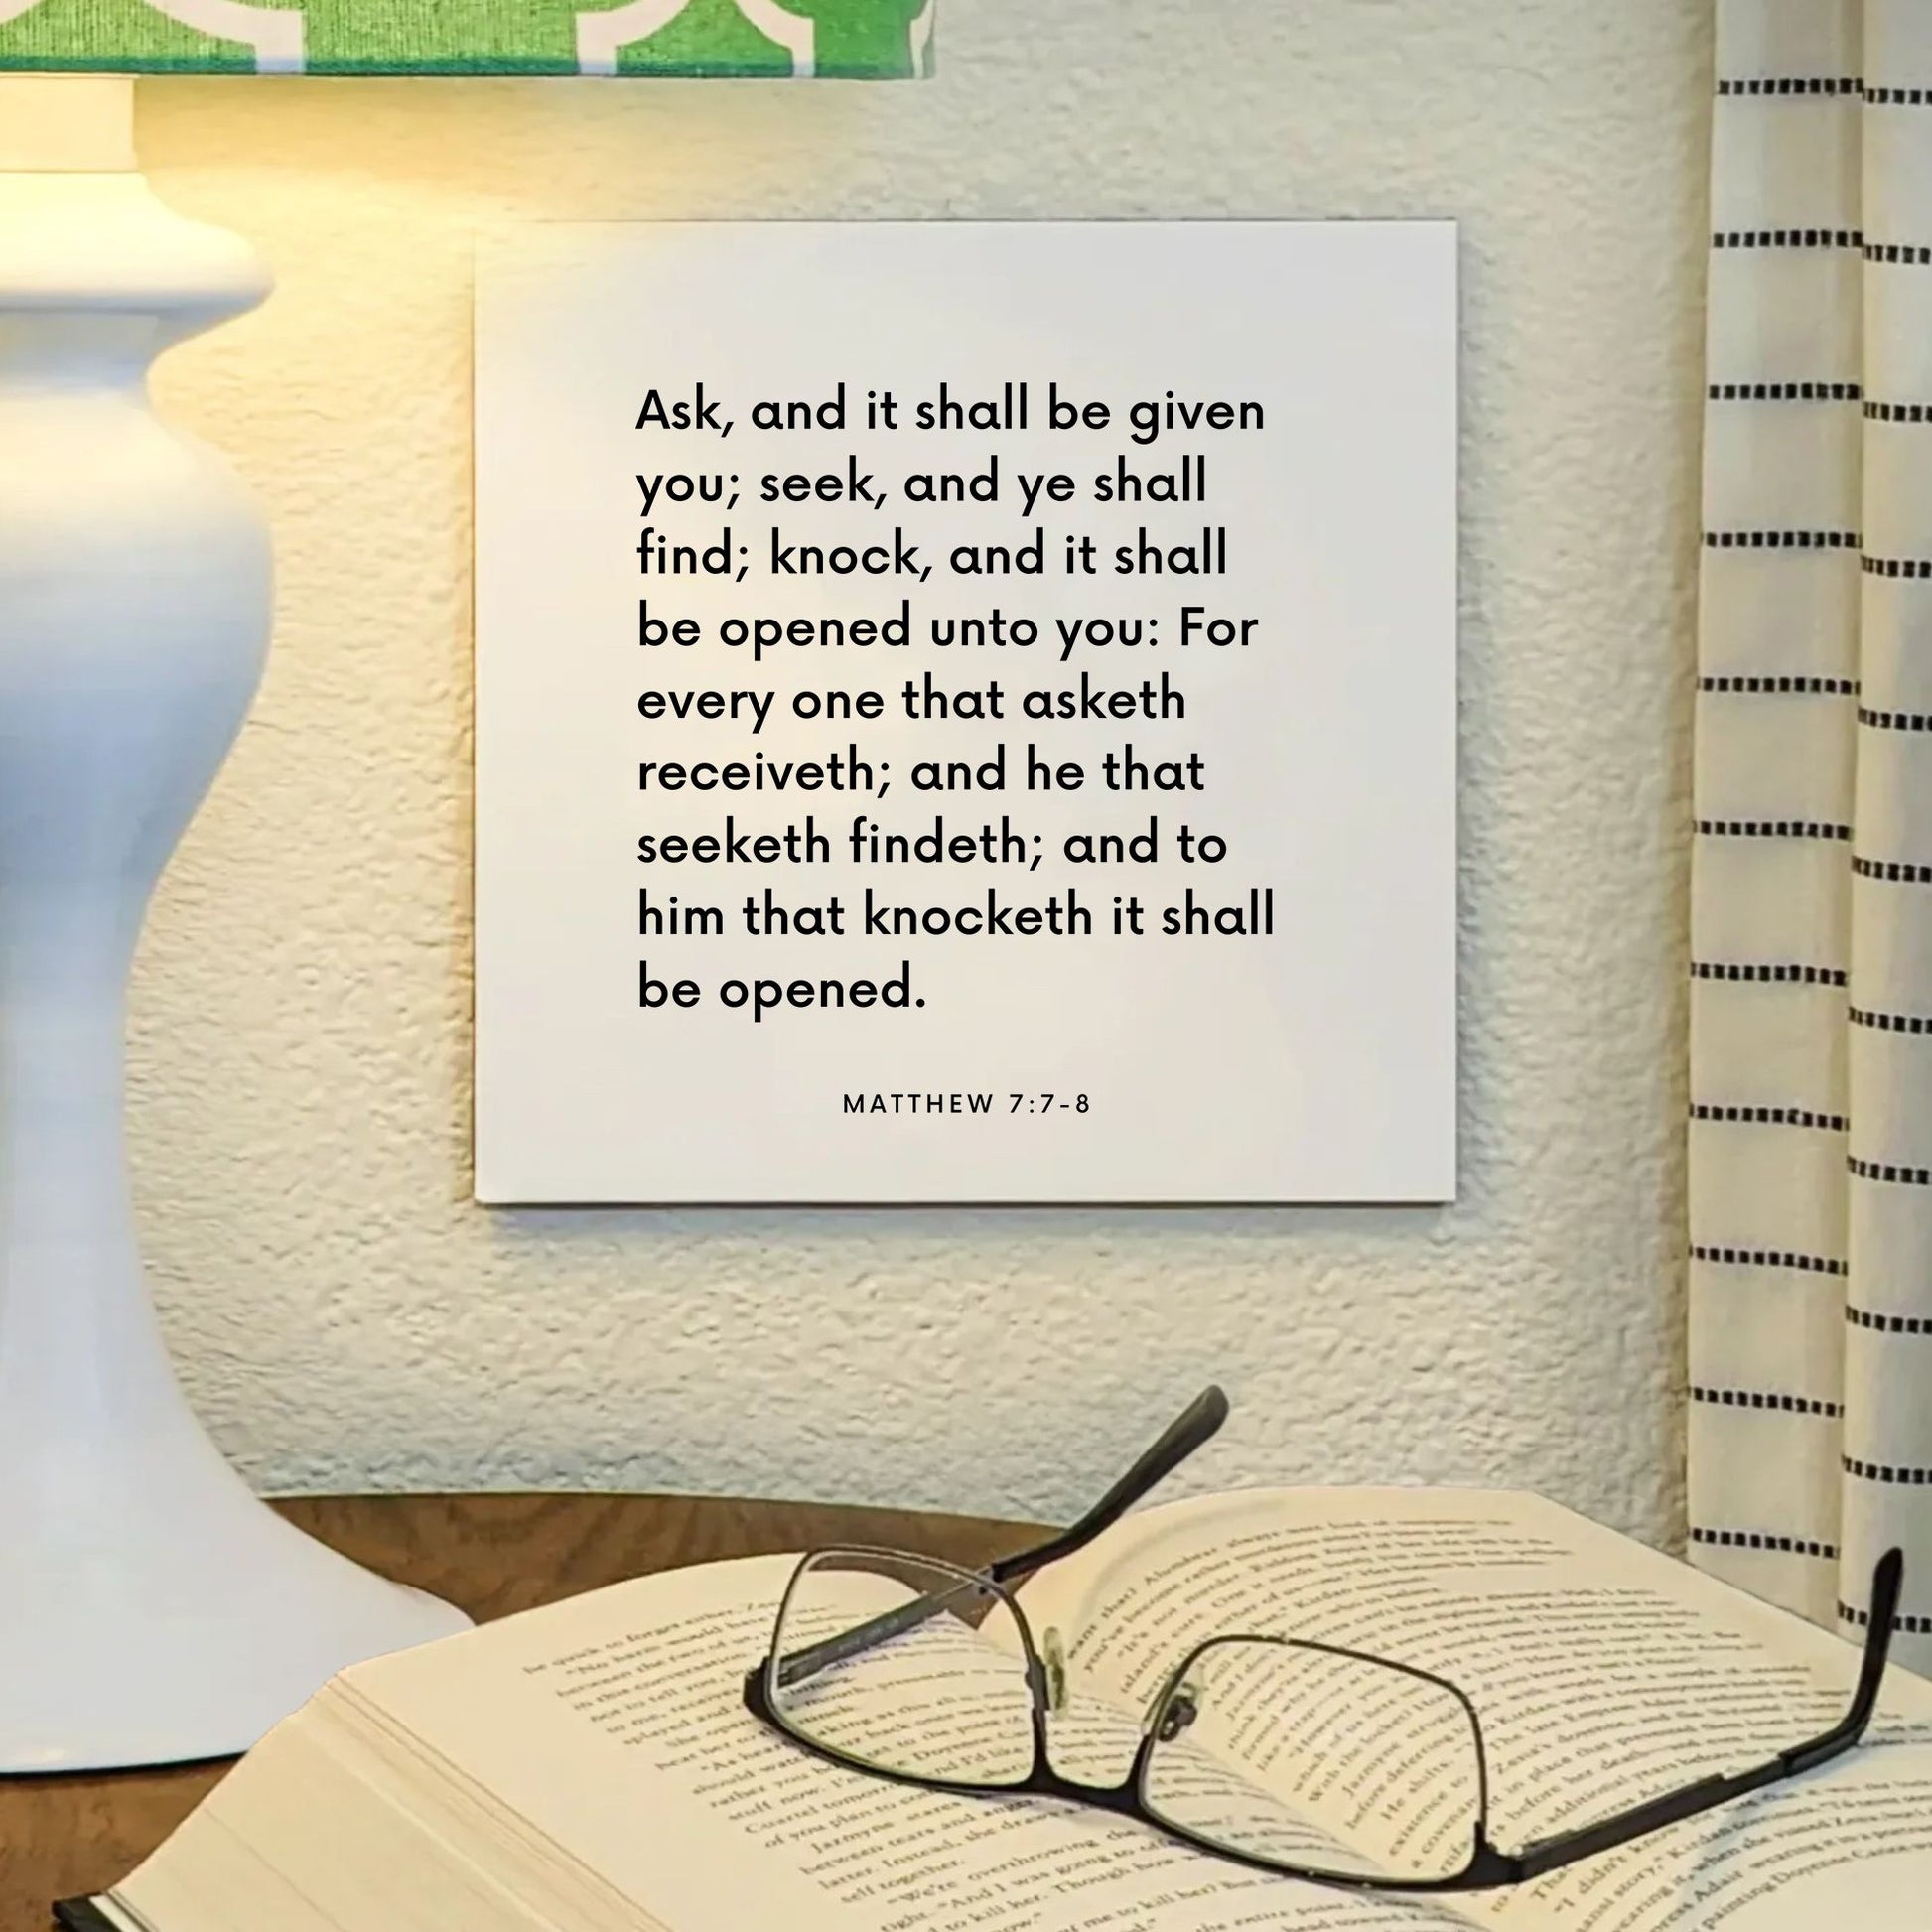 Lamp mouting of the scripture tile for Matthew 7:7-8 - "Every one that asketh receiveth; and he that seeketh findeth"